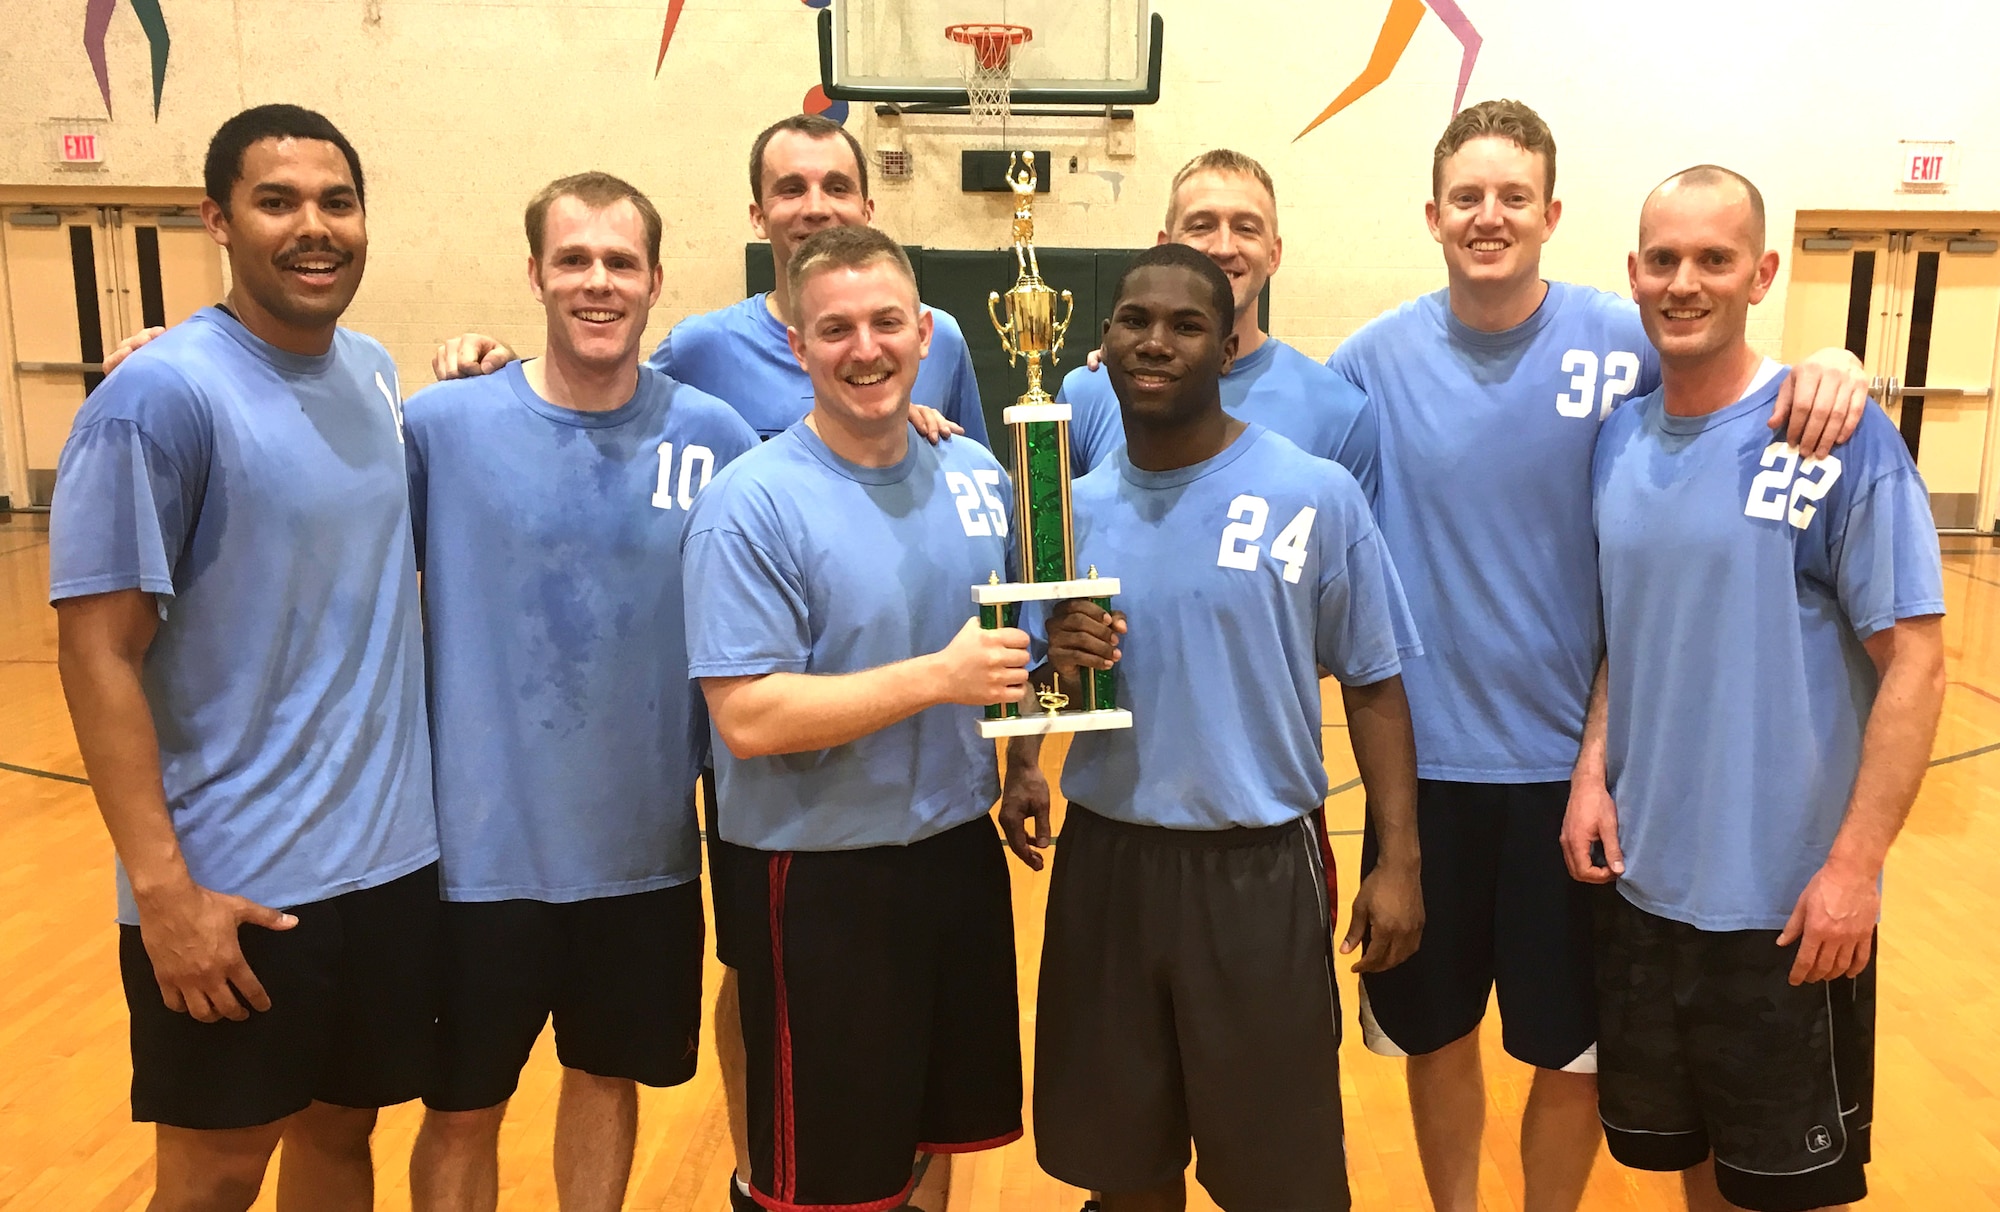 The 3rd Flying Training Squadron basketball team defeated the 71st Operations Support Squadron, 60-45, to take the base championship March 30 in the Bradley Fitness Center on base. The winning team: holding trophy from left, 1st Lt. Kyle Parker and Airman 1st Class Tre Quez Grundy; back row from left, Capt. Daniel Pickett, Maj. Jason Jones, Maj. Cullen Vetter, Capt. Kyle Williams, Maj. Jacob Bergmann and Capt. Robert Rogers. (Courtesy photo)